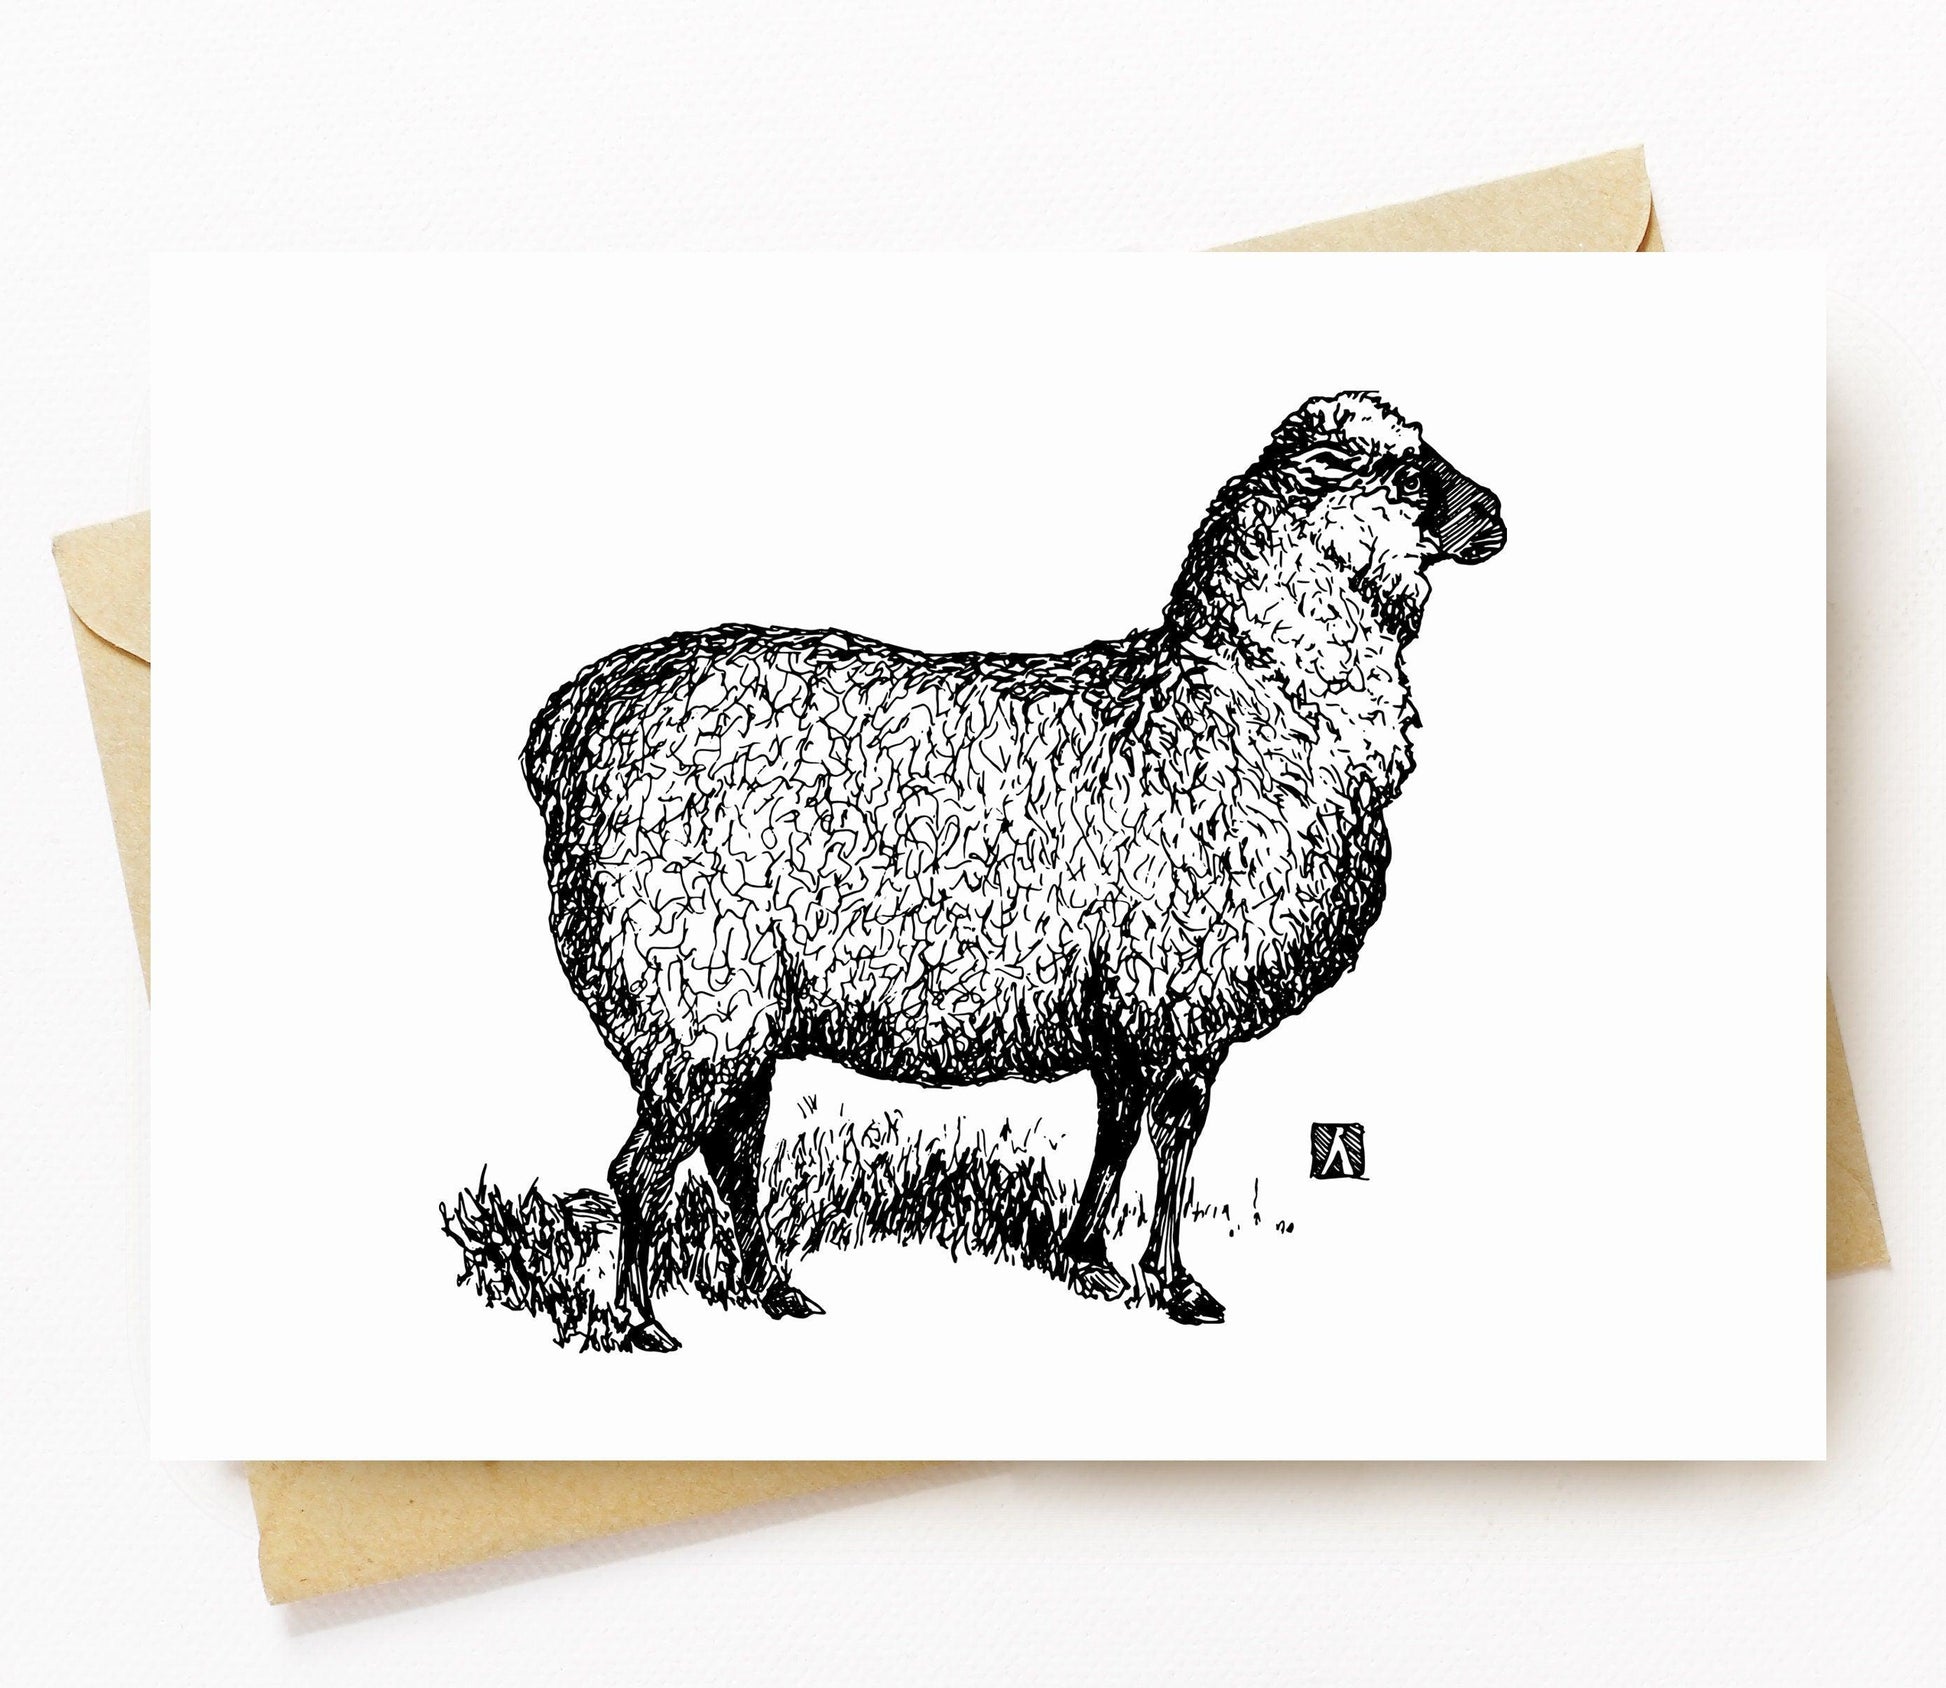 BellavanceInk: Greeting Card With A Pen & Ink Drawing Of A Proud Sheep 5 x 7 Inches - BellavanceInk